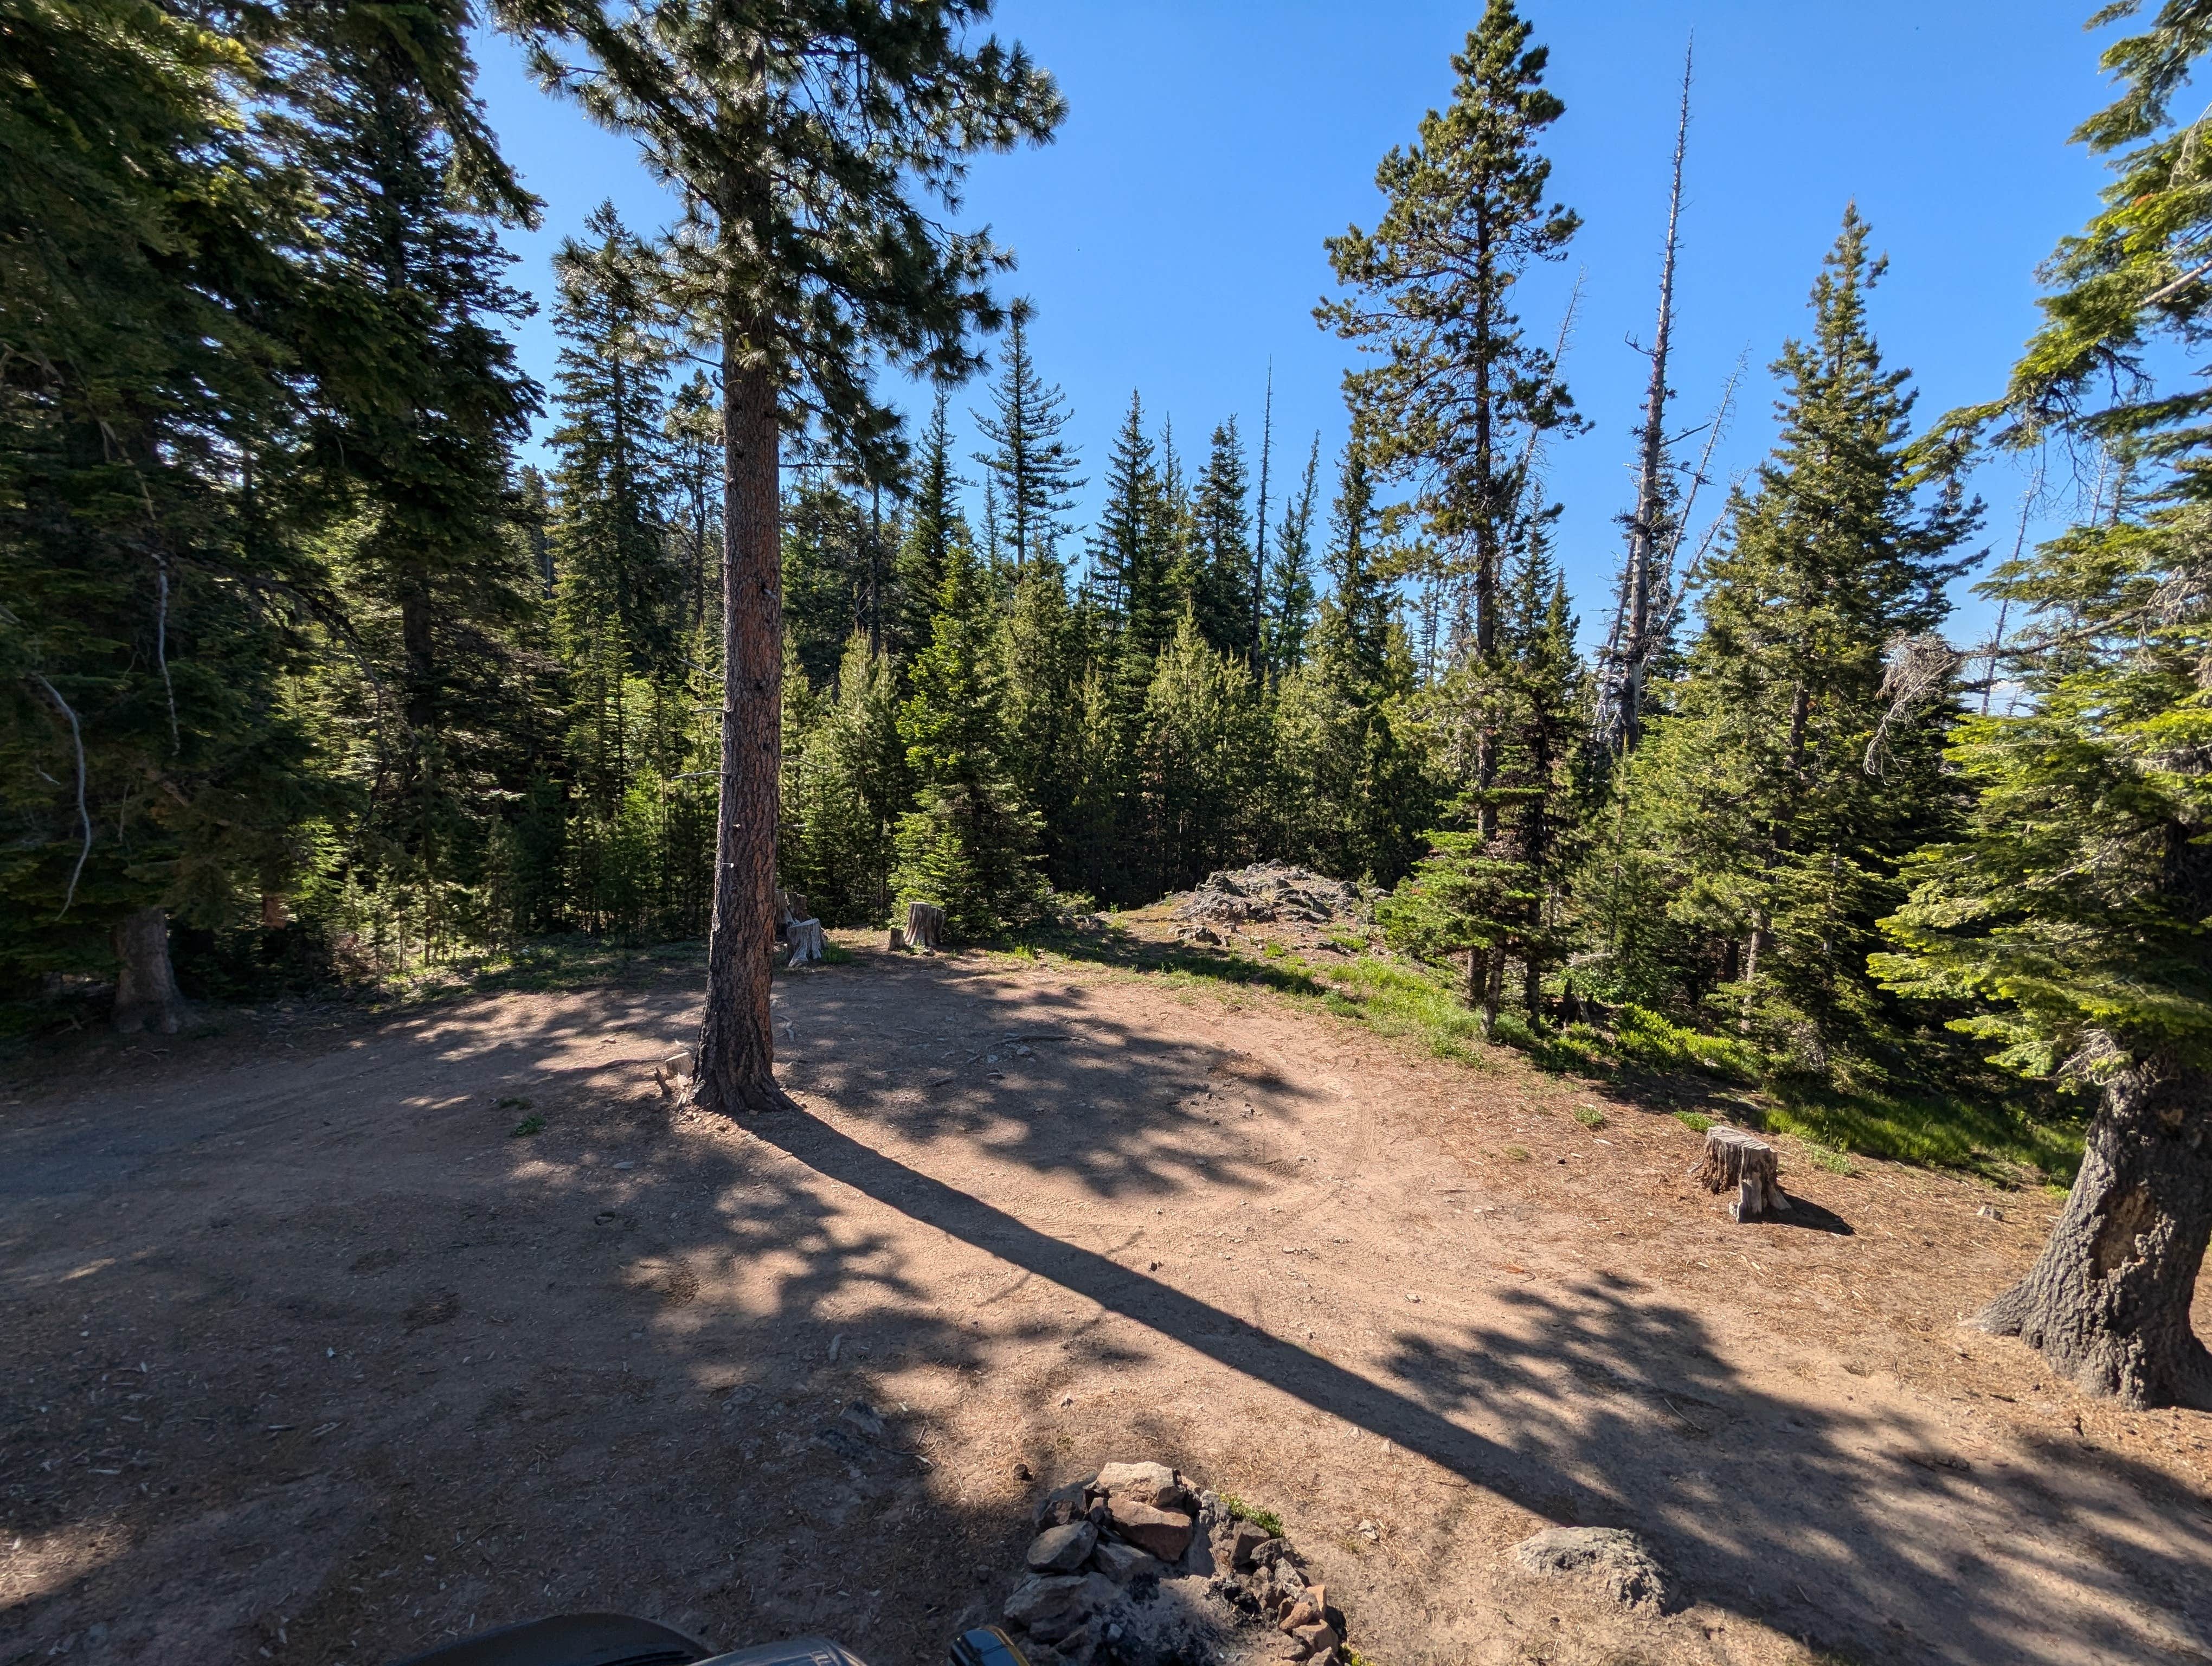 Camper submitted image from Forest Rd 2730 - Mt Hood NF - 4